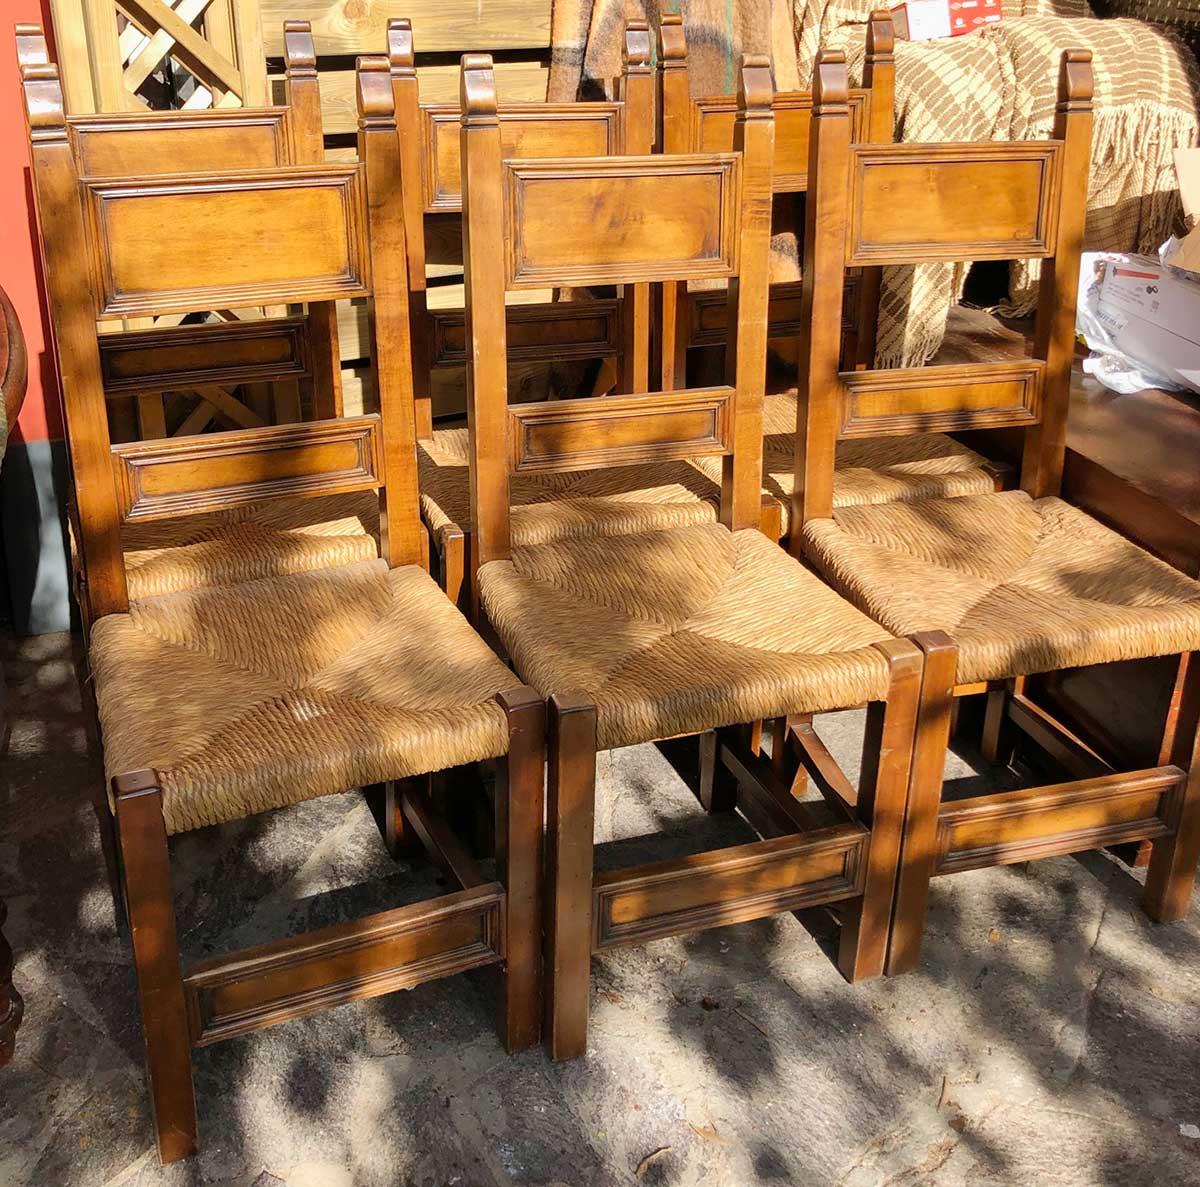 Antique Tuscan solid walnut chairs, lot of 6 pieces, good stuffing, handmade.
Size cm.: 45 x 43 x 47/110 H
Period: circa 1900.
They will be delivered in a specific wooden case for export, packed in bubble wrap.
Comes from an old country house in the